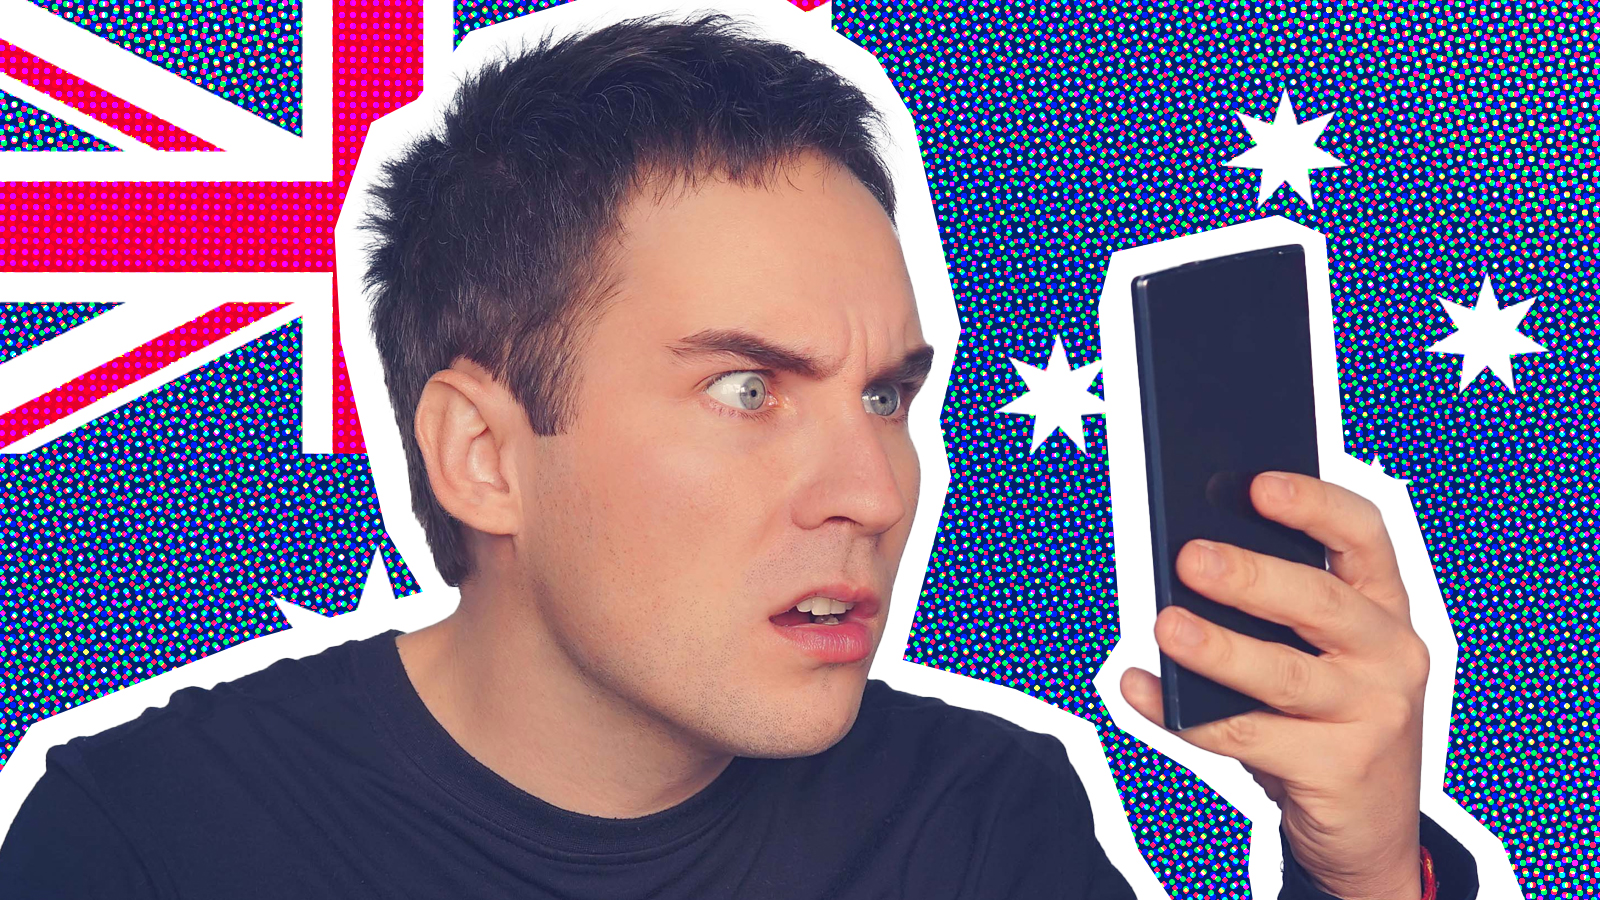 What Americans Find Bizarre About Australia